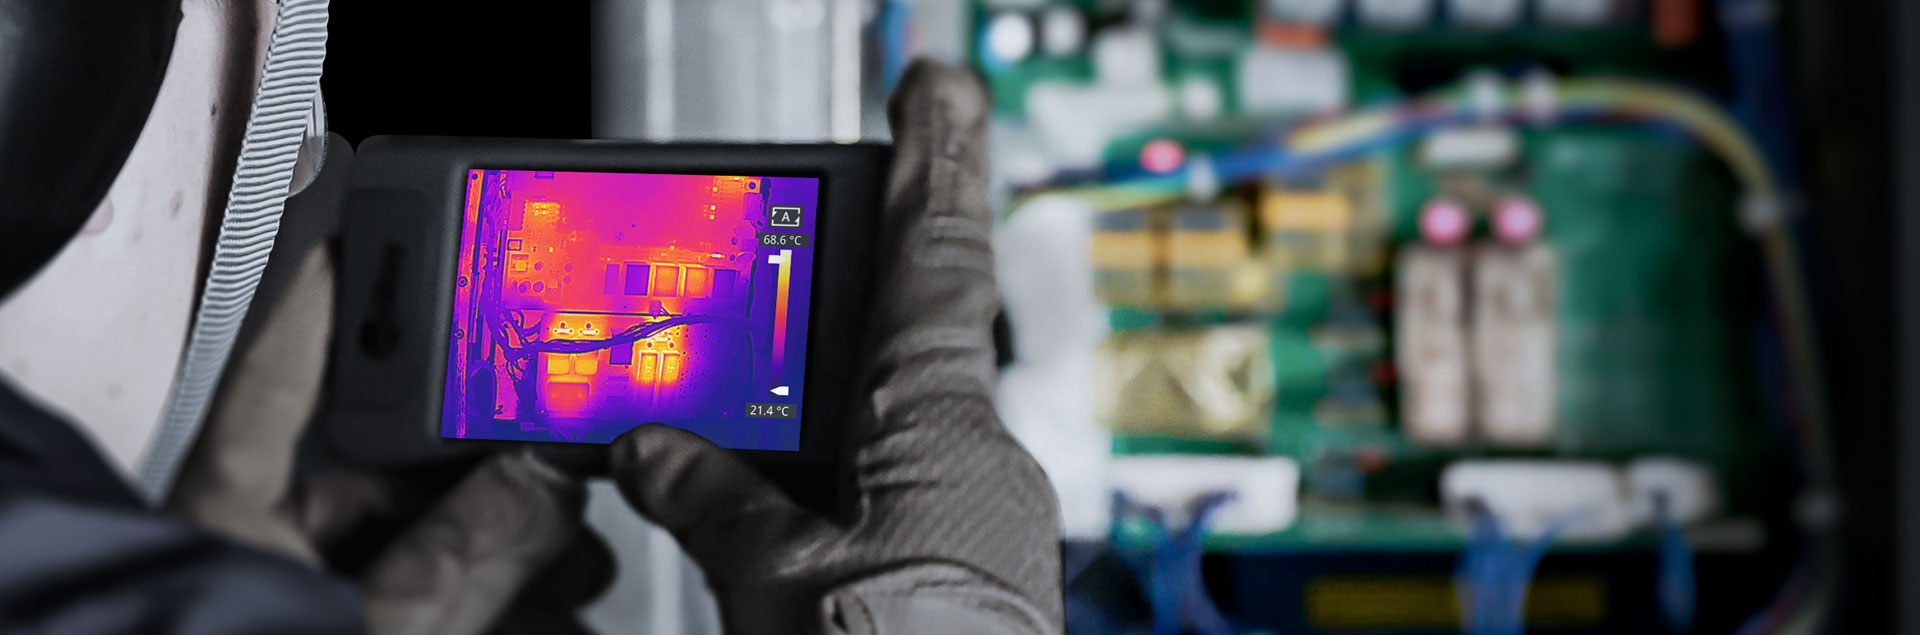 InfiRay provides nearly one million of thermal cameras with infrared detectors.